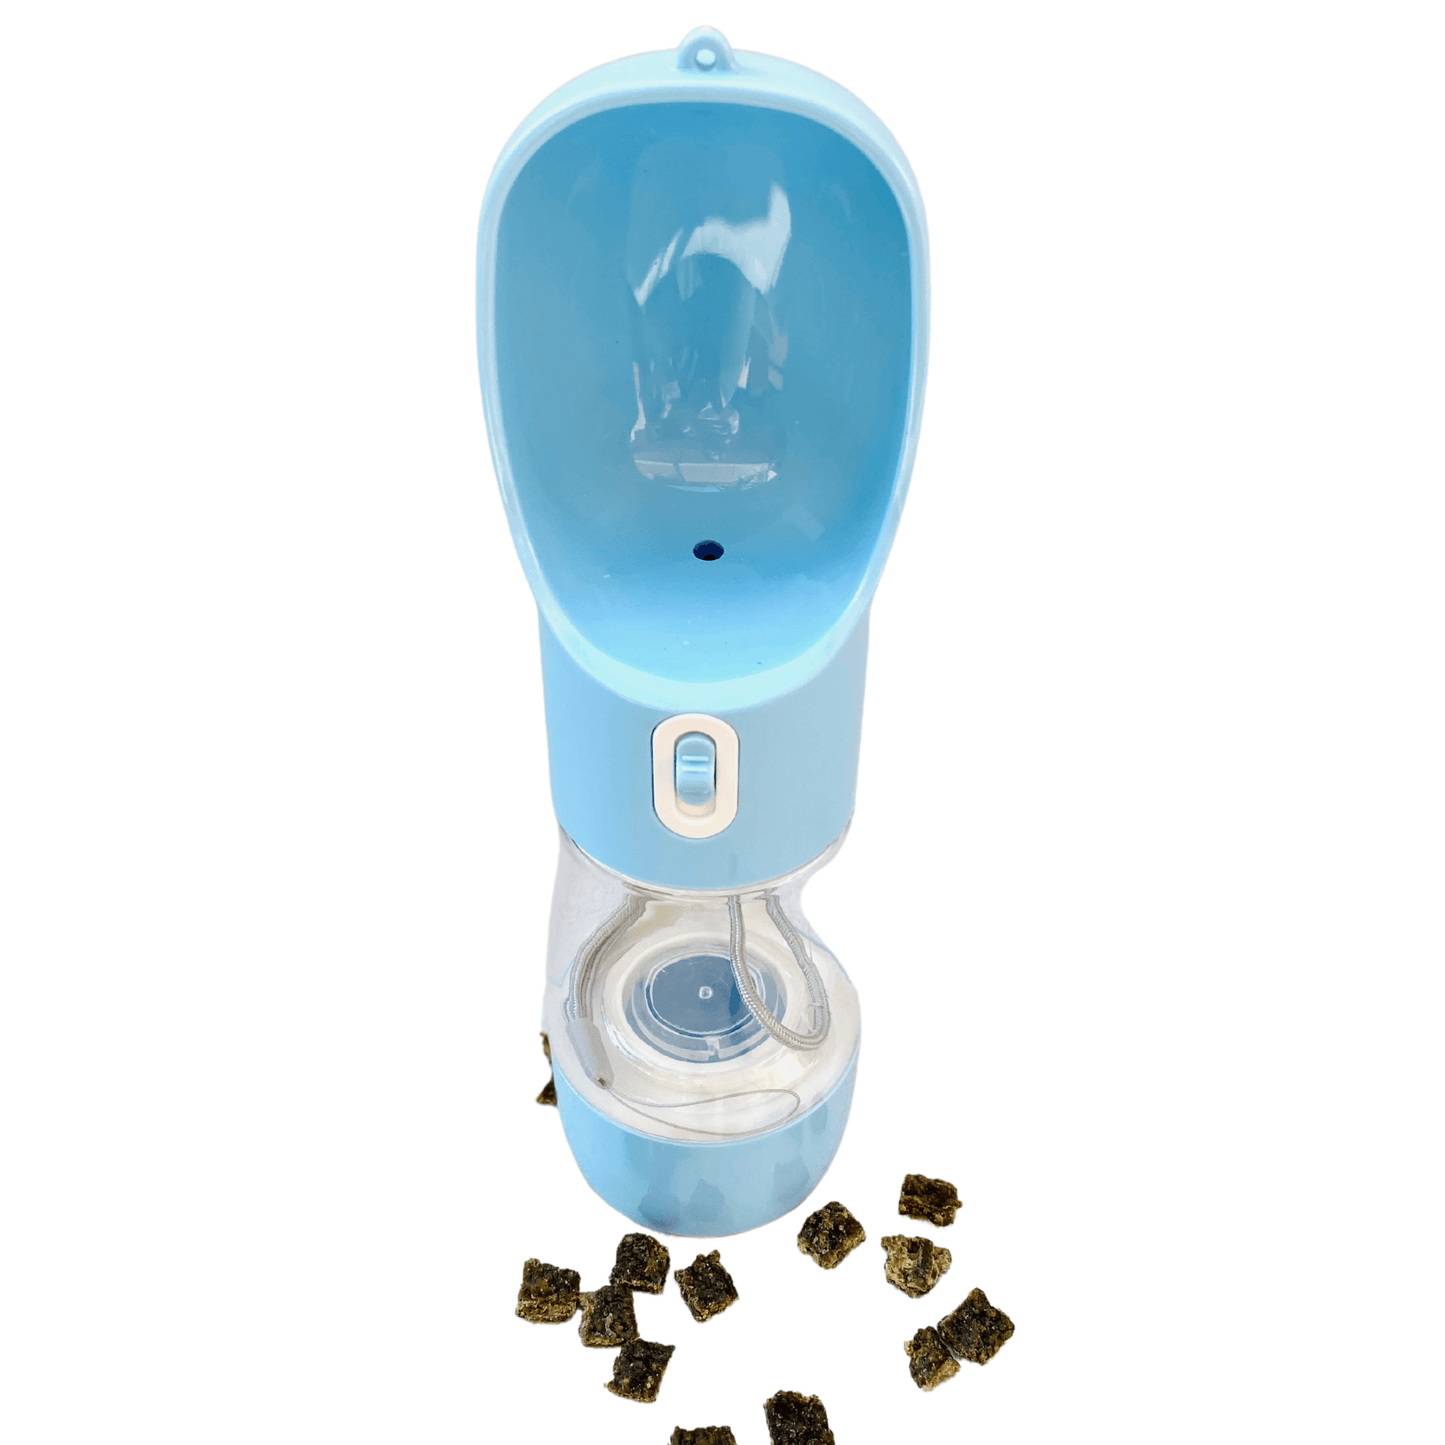 Dog travel treat and water bottle for your furbaby